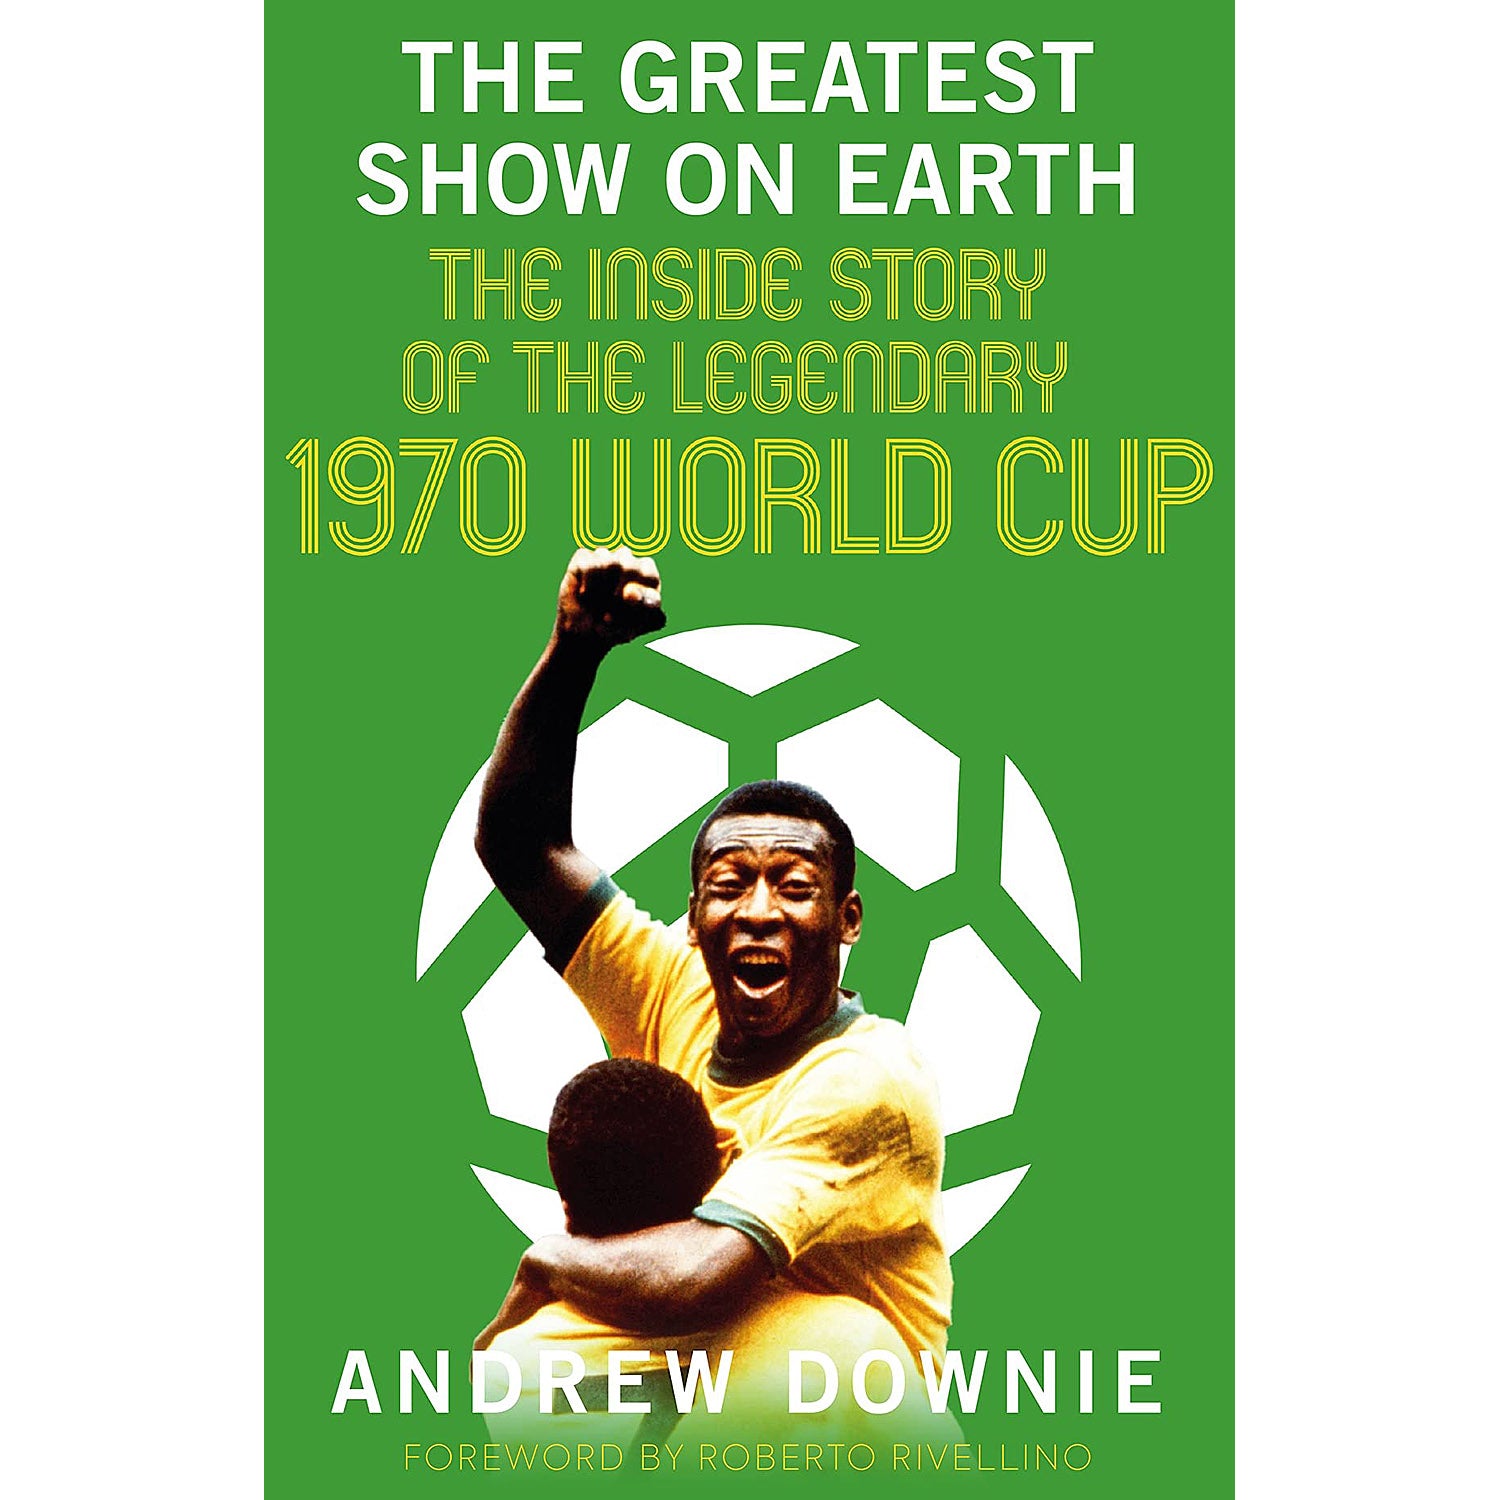 The Greatest Show on Earth – The Inside Story of the Legendary 1970 World Cup